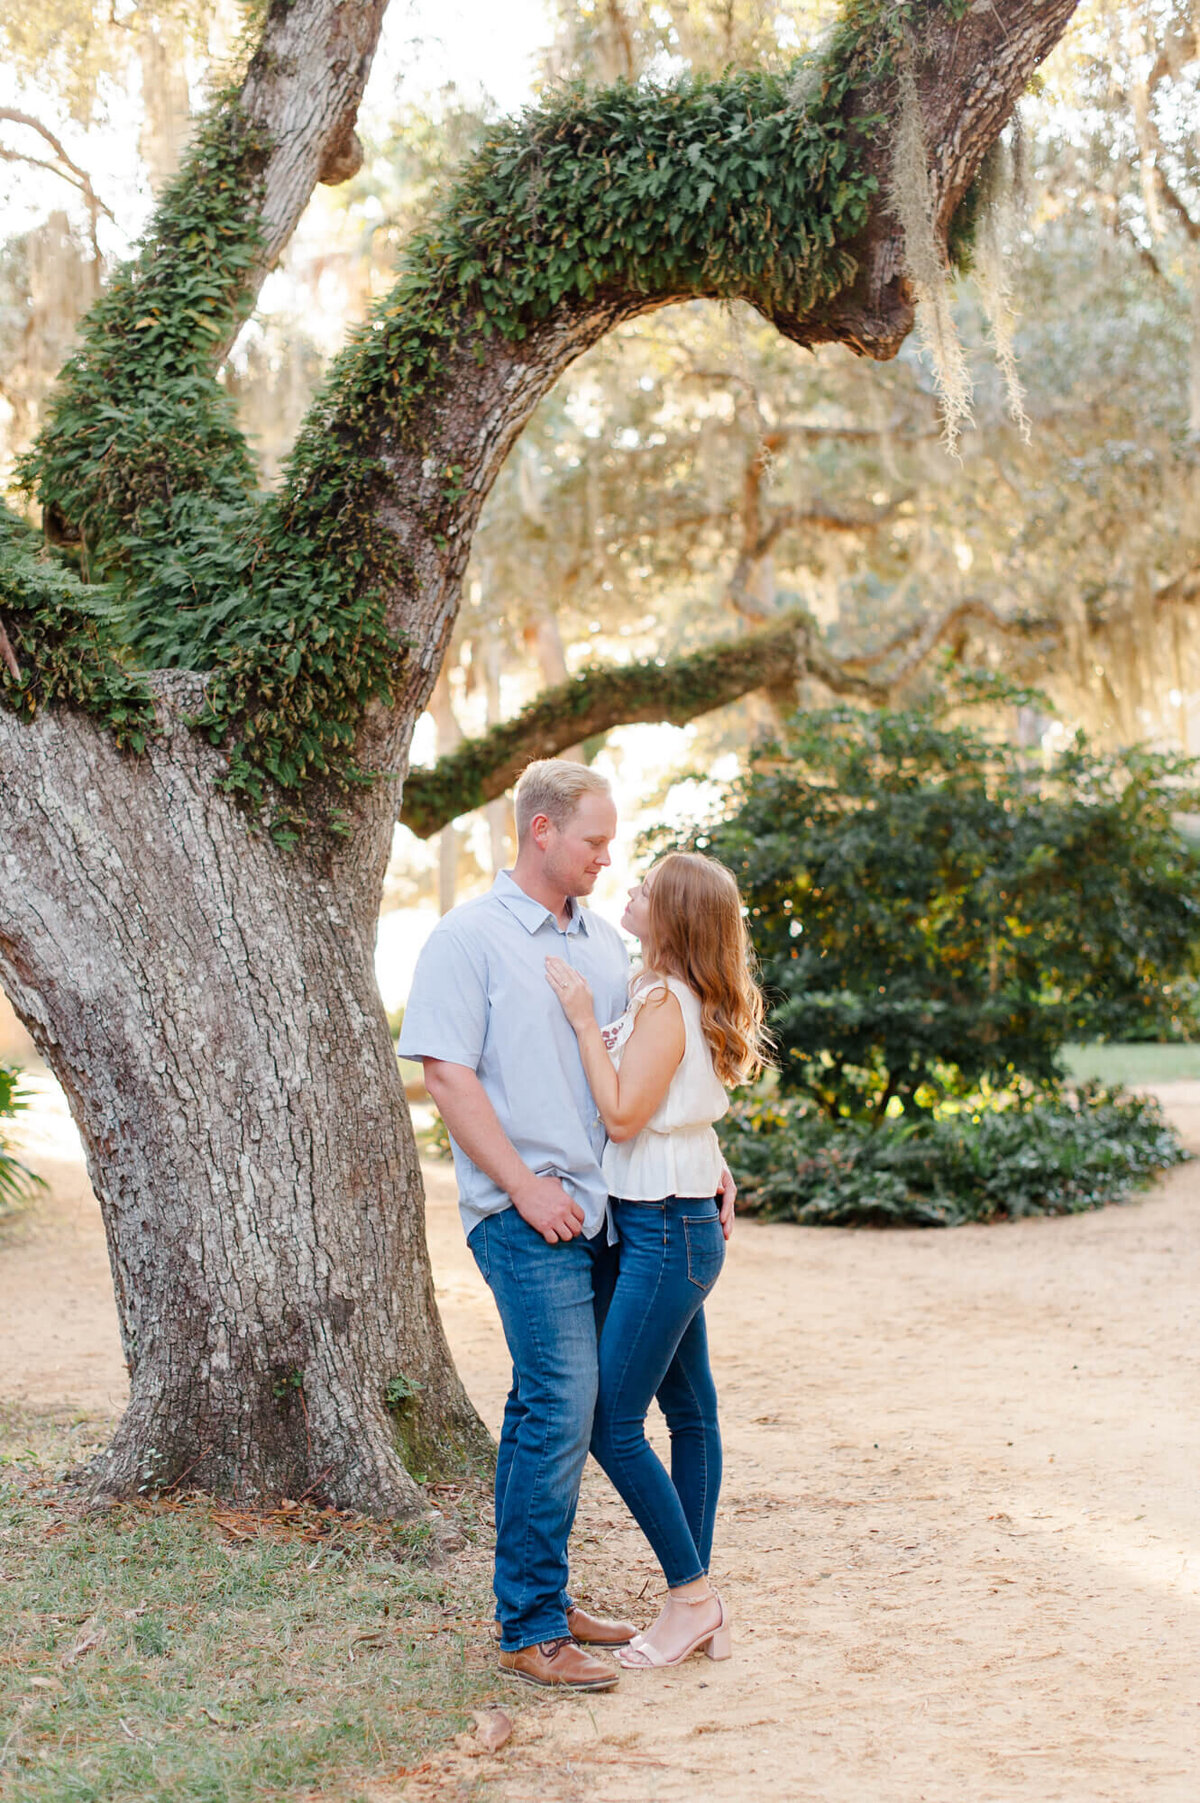 Couple poses next to a tree while staring lovingly at each other at Washington Oaks Gardens State Park